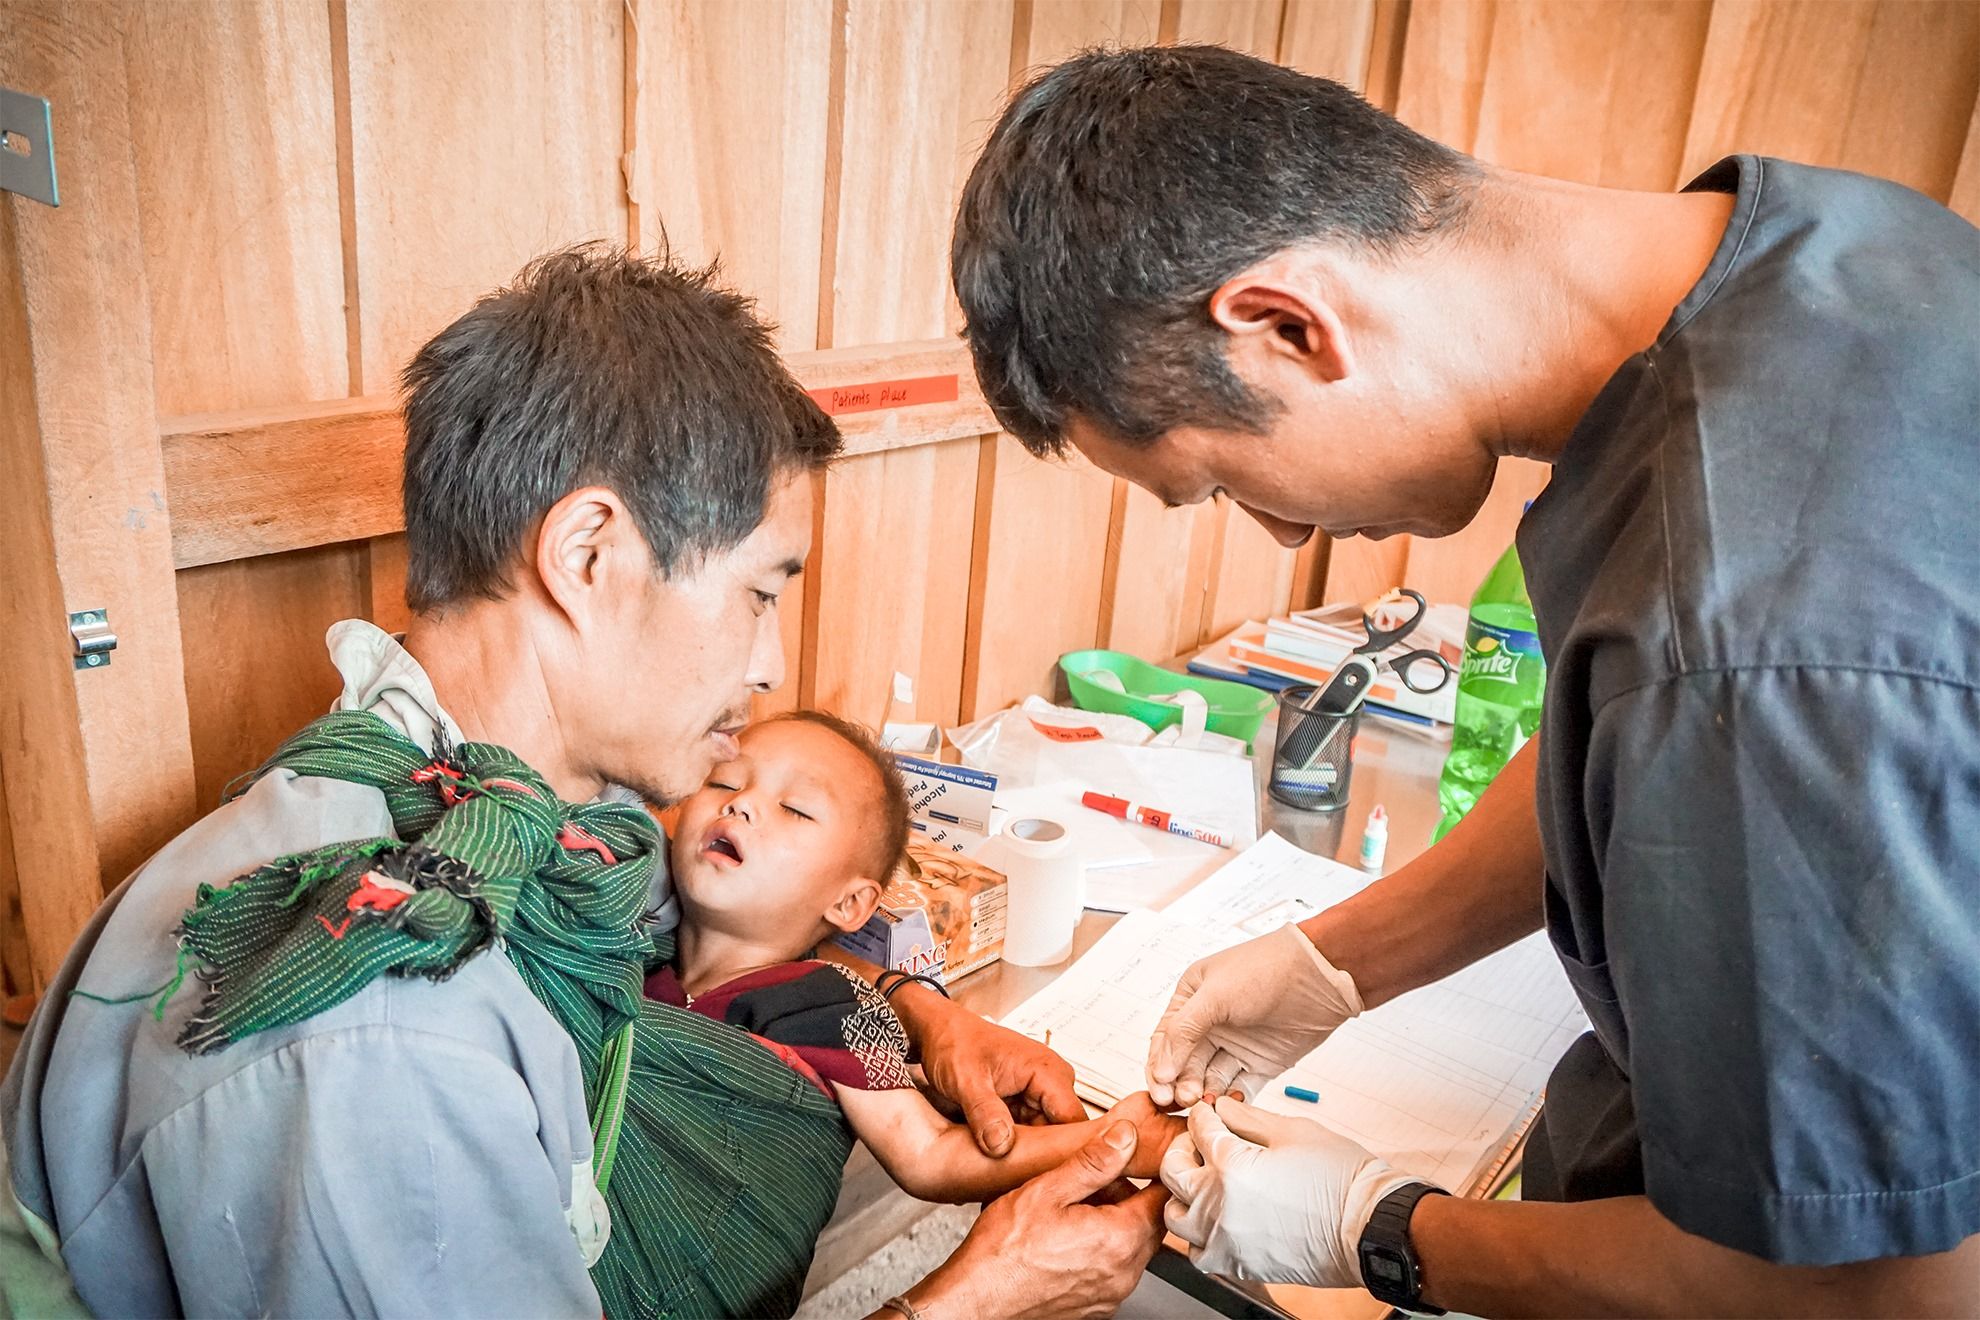 Earth Mission is building a highly-functioning healthcare system for the Karen (ka-REN) people in the mountain villages of Myanmar & Thailand